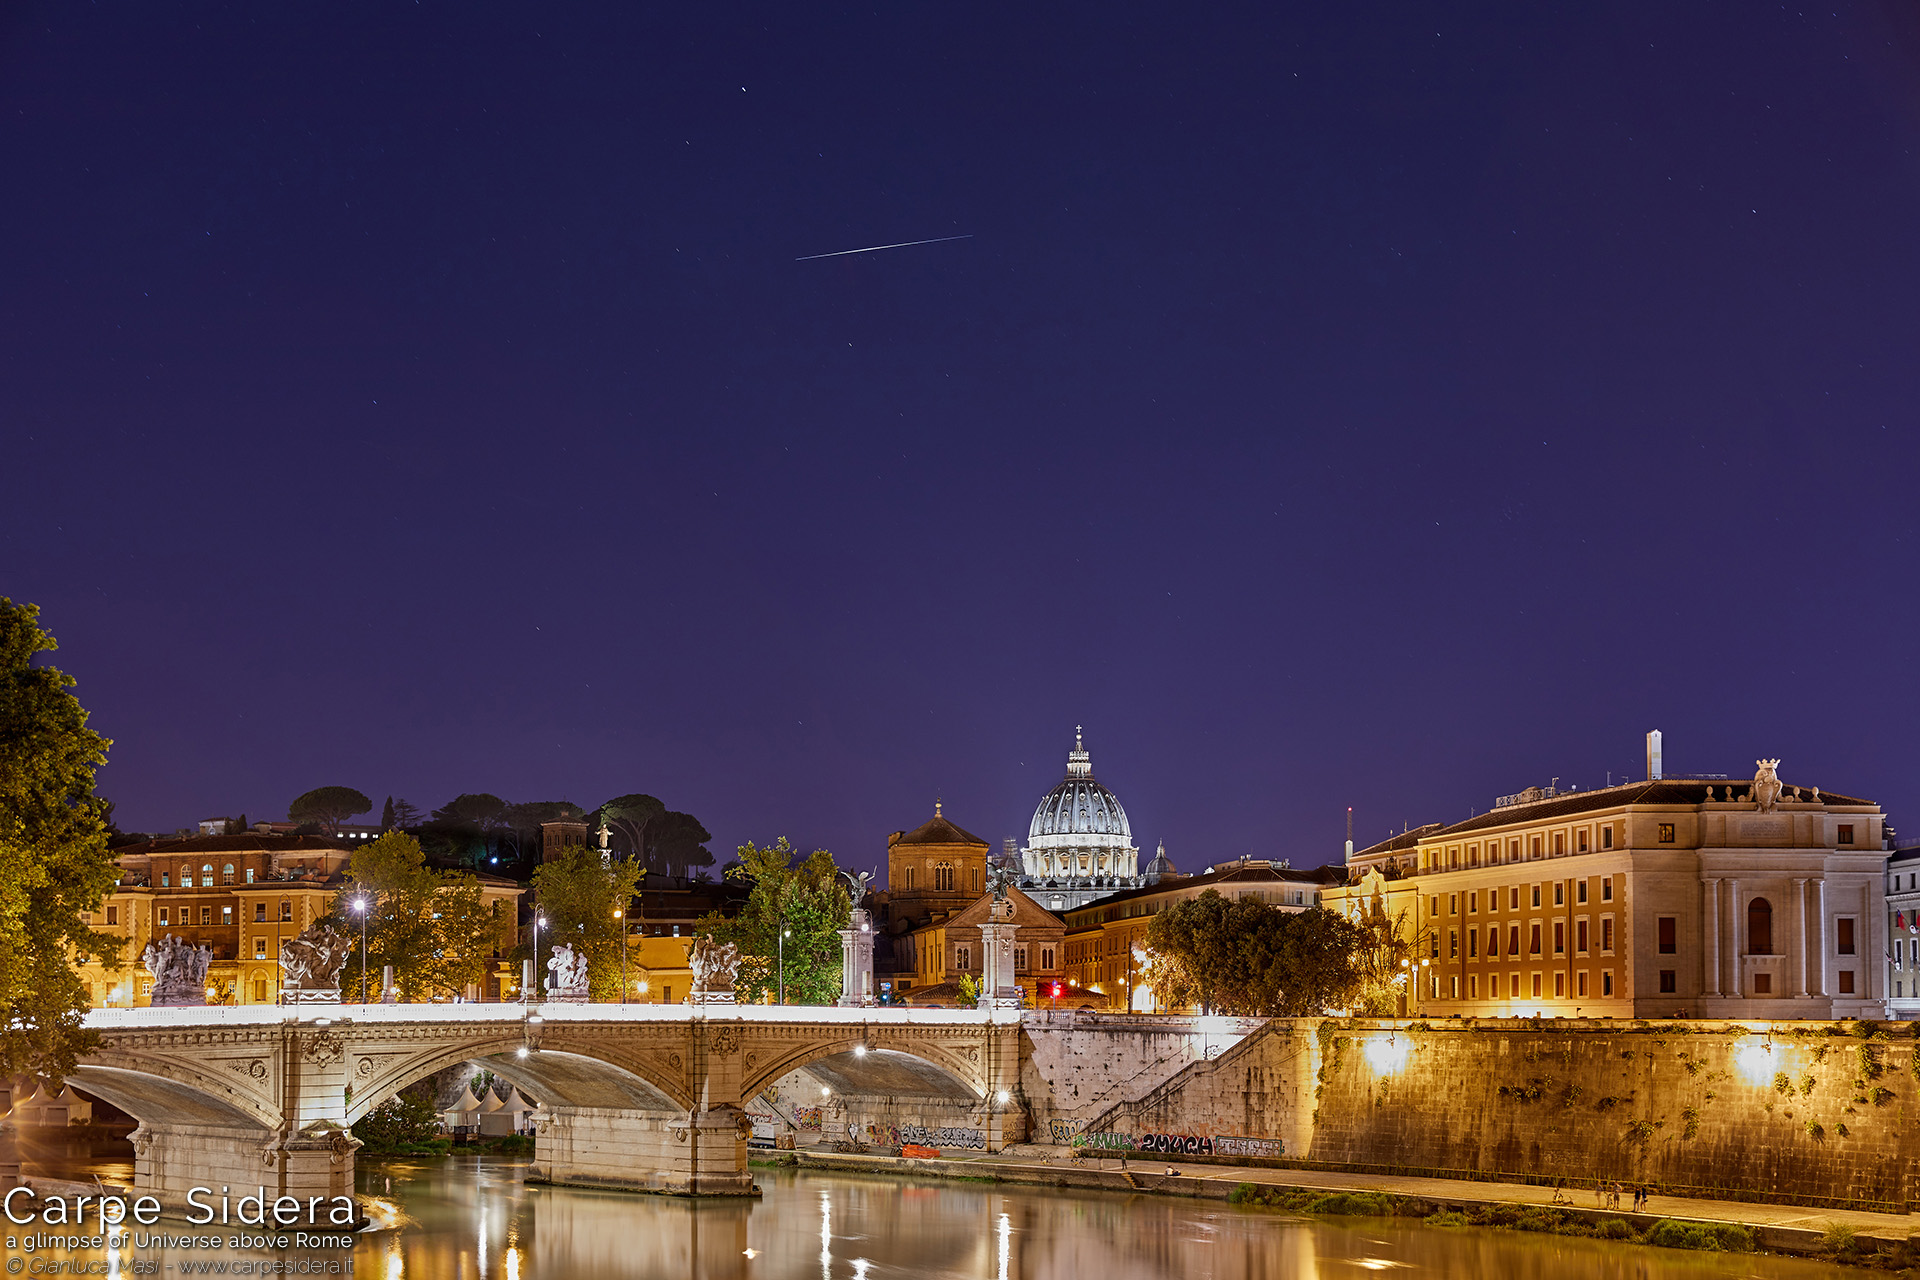 11. The Iridium 10 satellite shines above the Tiber and the dome of St. Peter's.